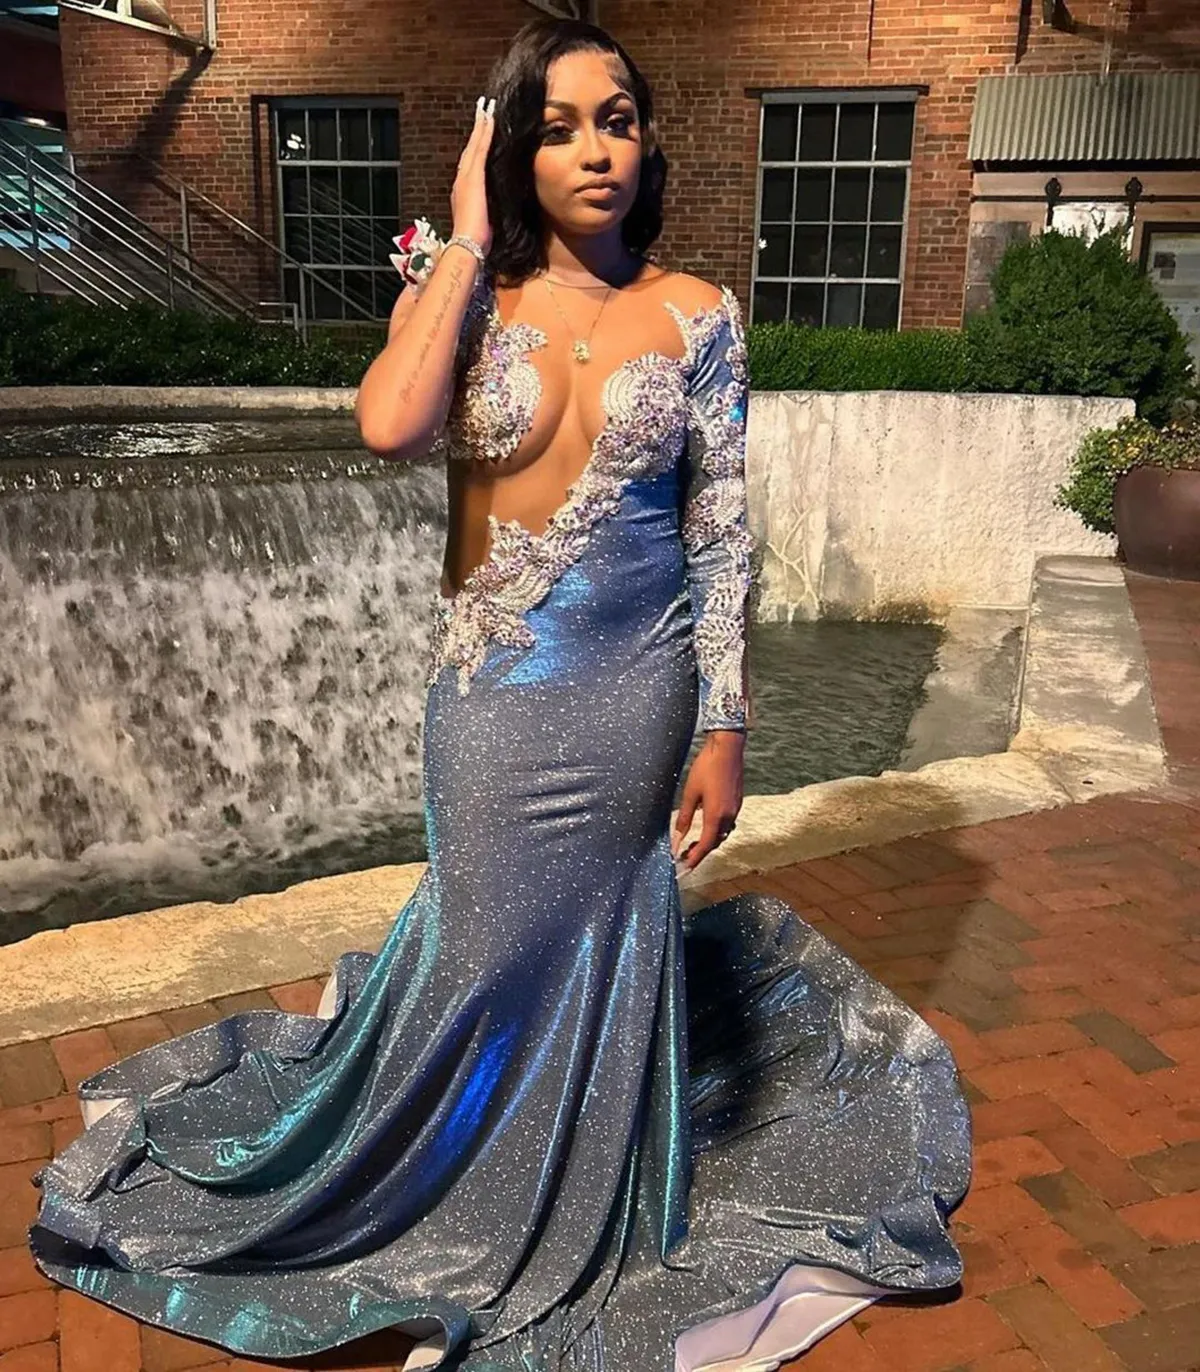 Designer Mermaid Prom Dresses One Sleeve Appliques Sequined Illusion Shining Cloths Tassels Court Gown Custom Made Party Evening Dress Vestido De Noite